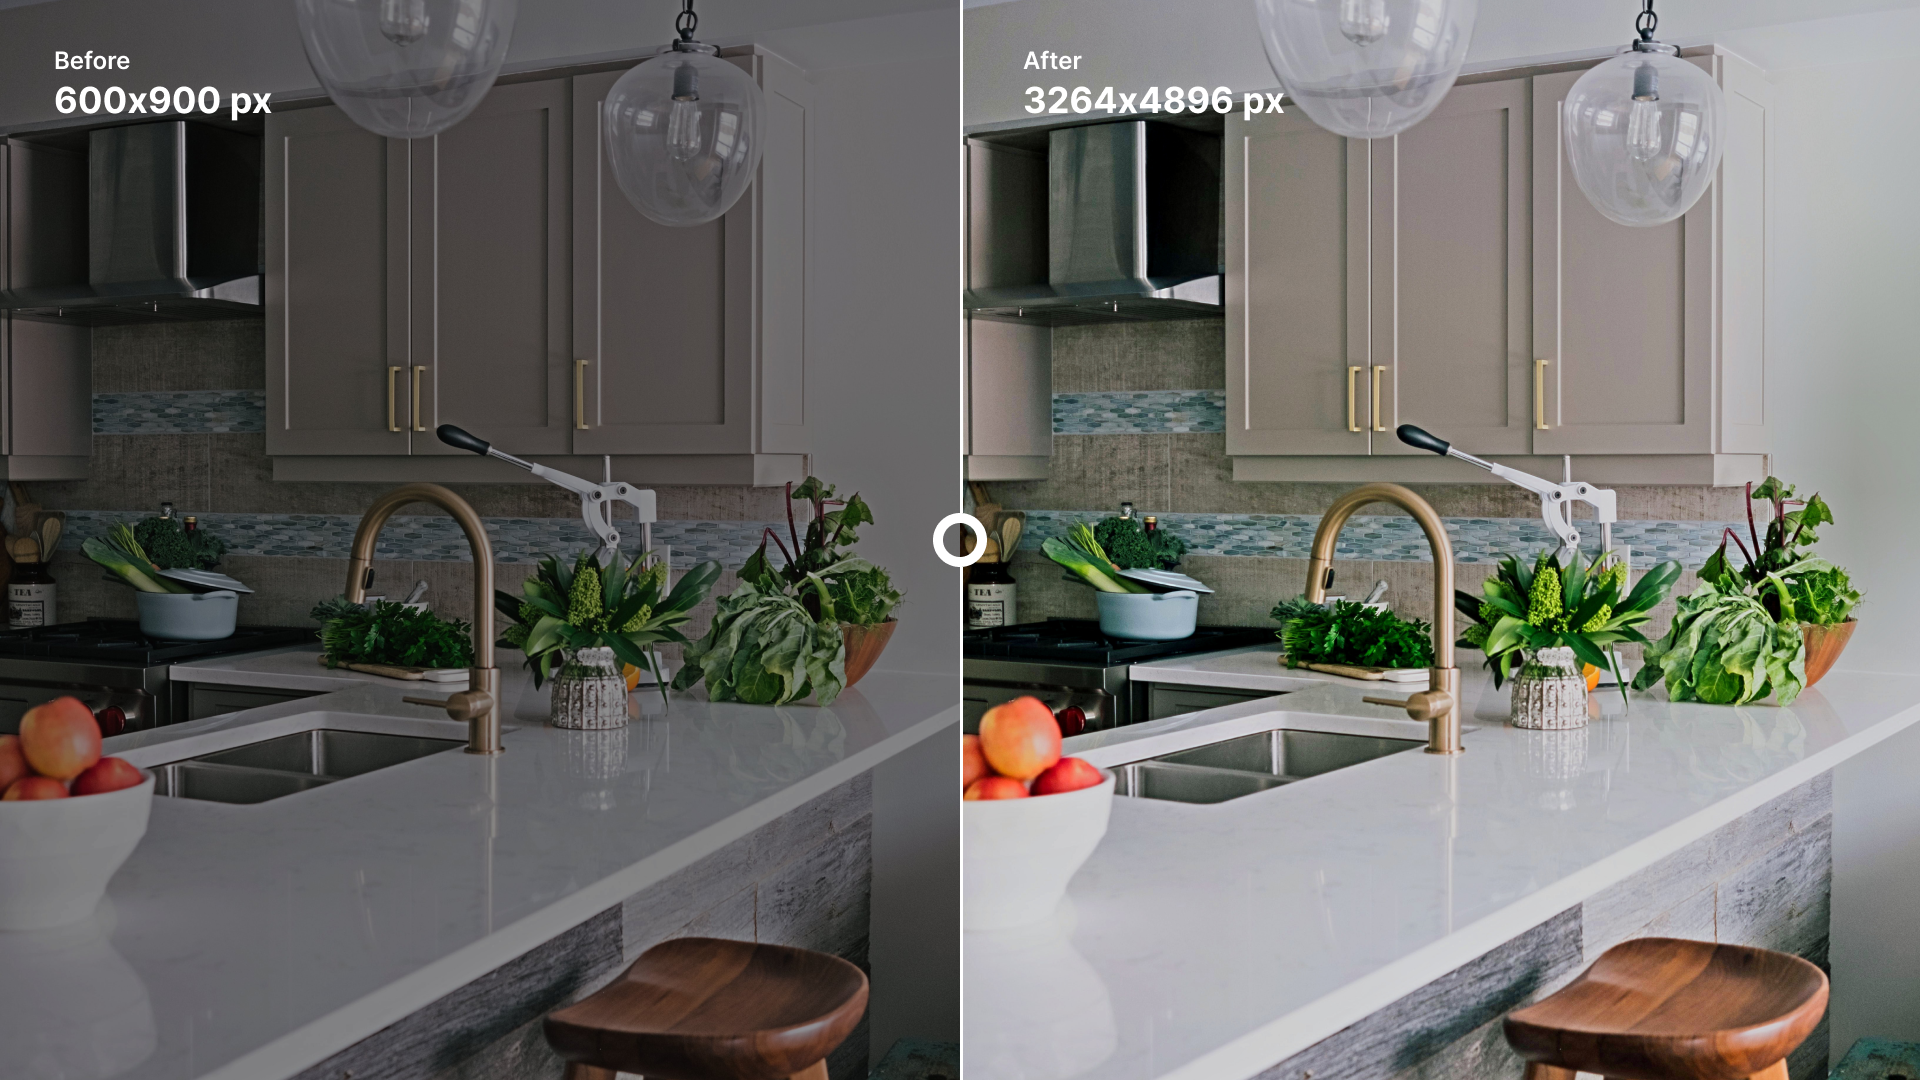 Ukrainian startup Let’s Enhance works like Photoshop: it removes objects from the image, changes the background, fixes lighting and corrects color. The main difference is that it does all of that automatically, using artificial intelligence.